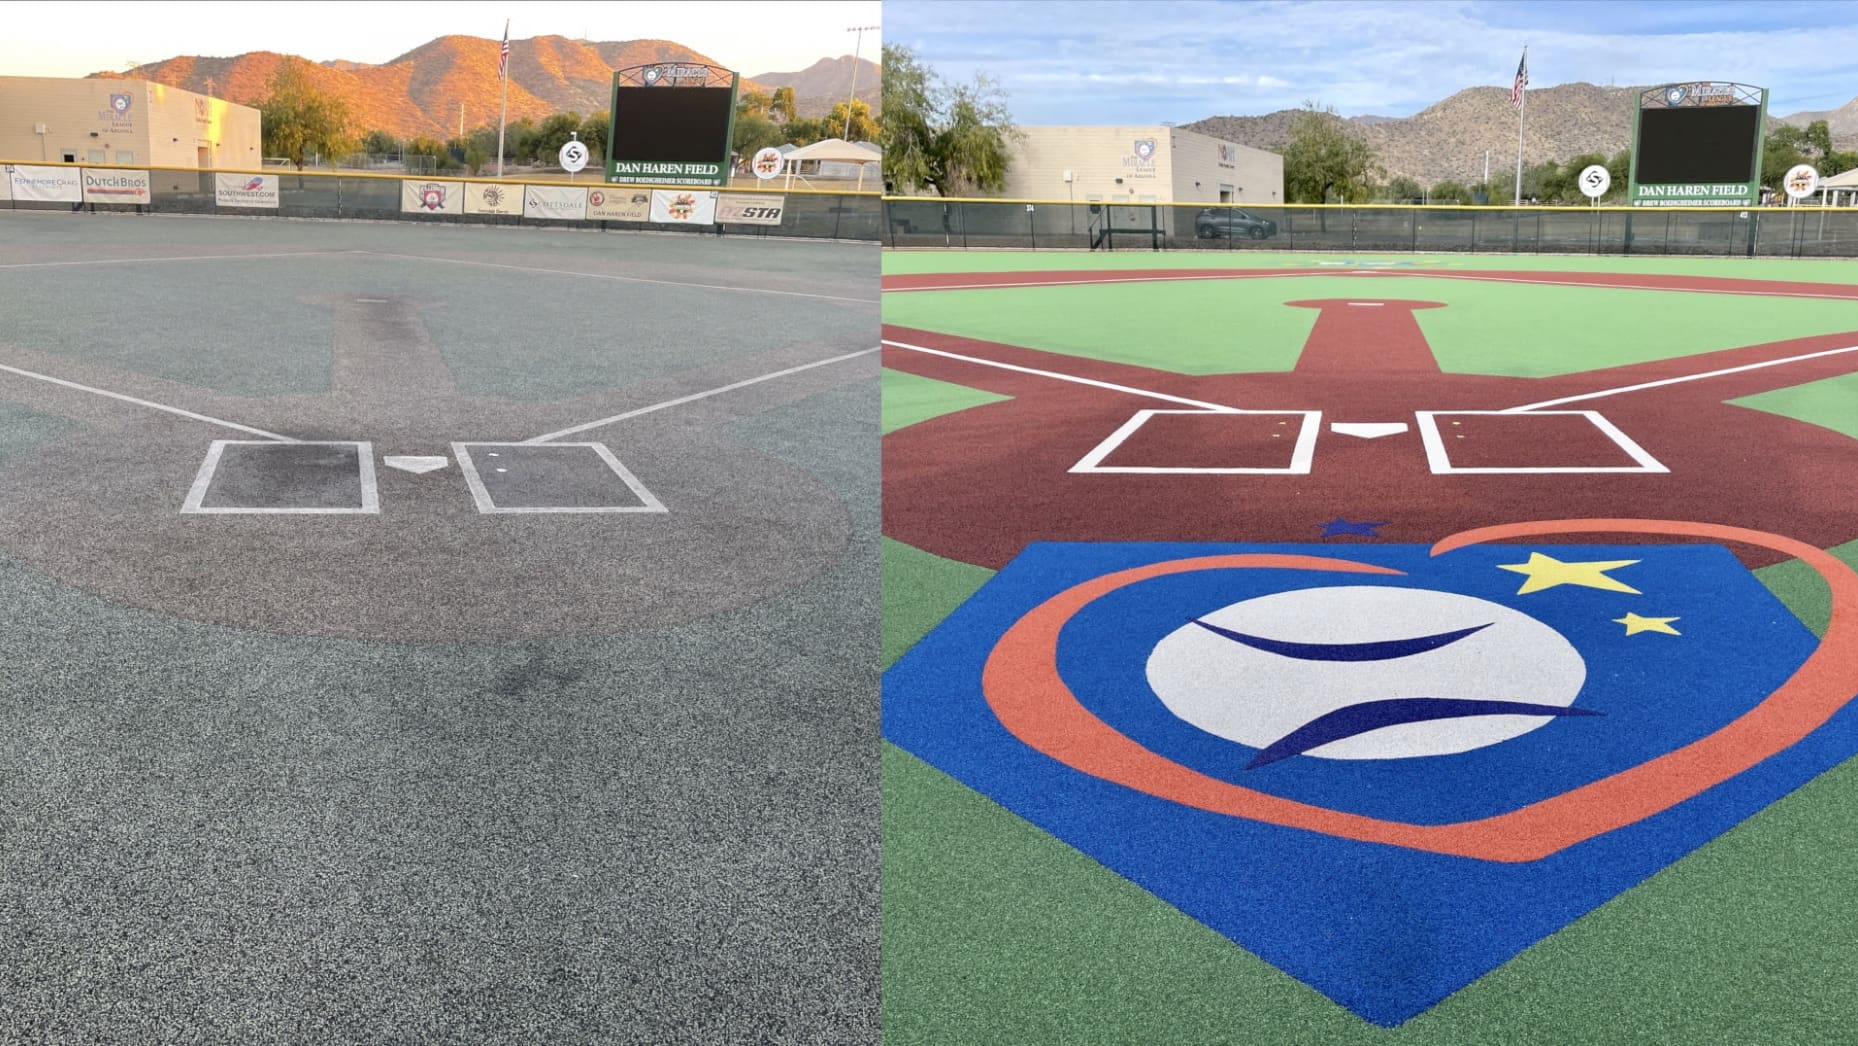 A baseball field with the number 1 2 on it and a ball logo painted on the ground.